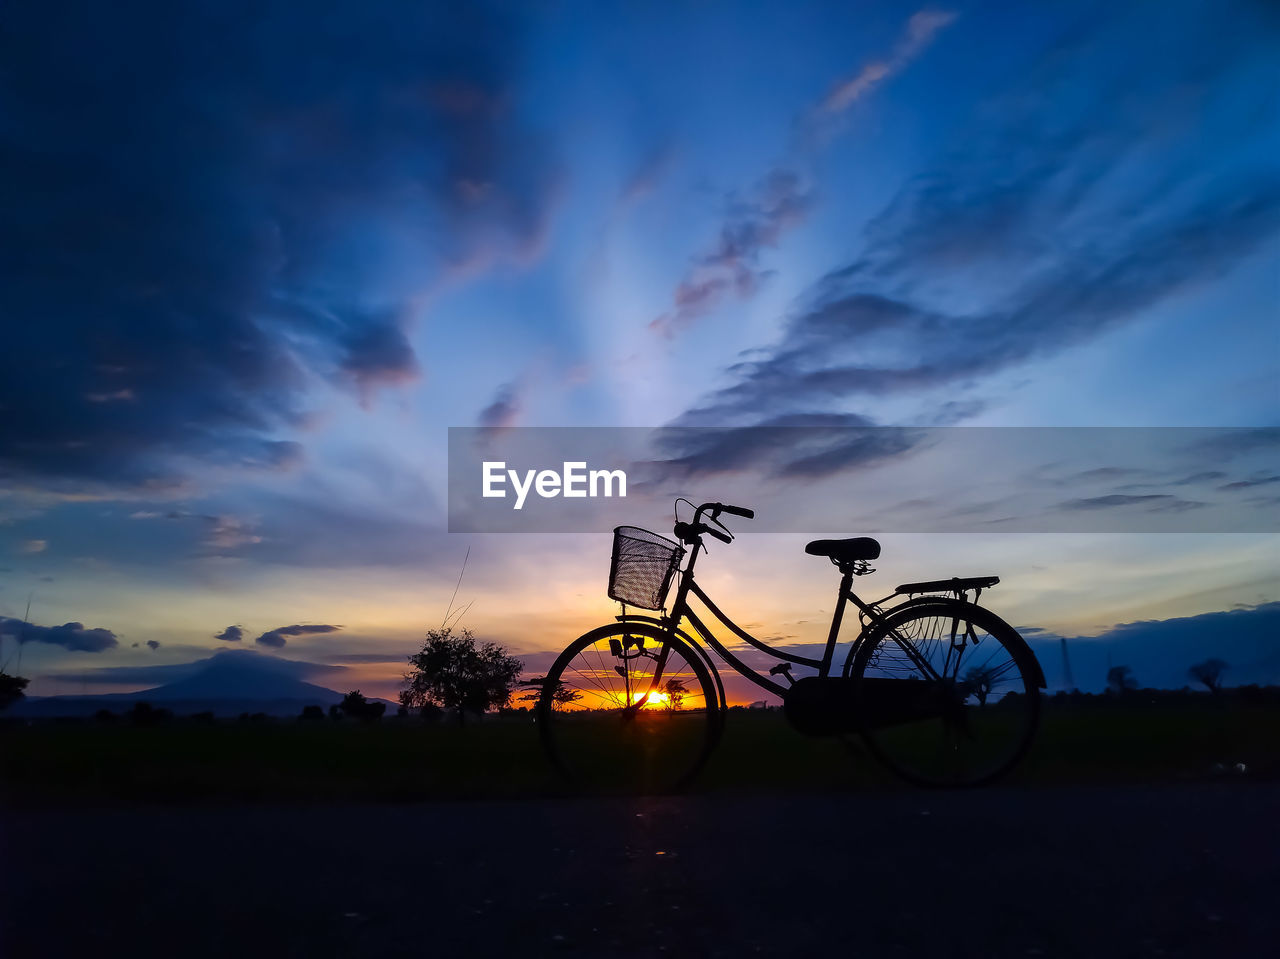 Silhouette bicycle on field against sky during sunset